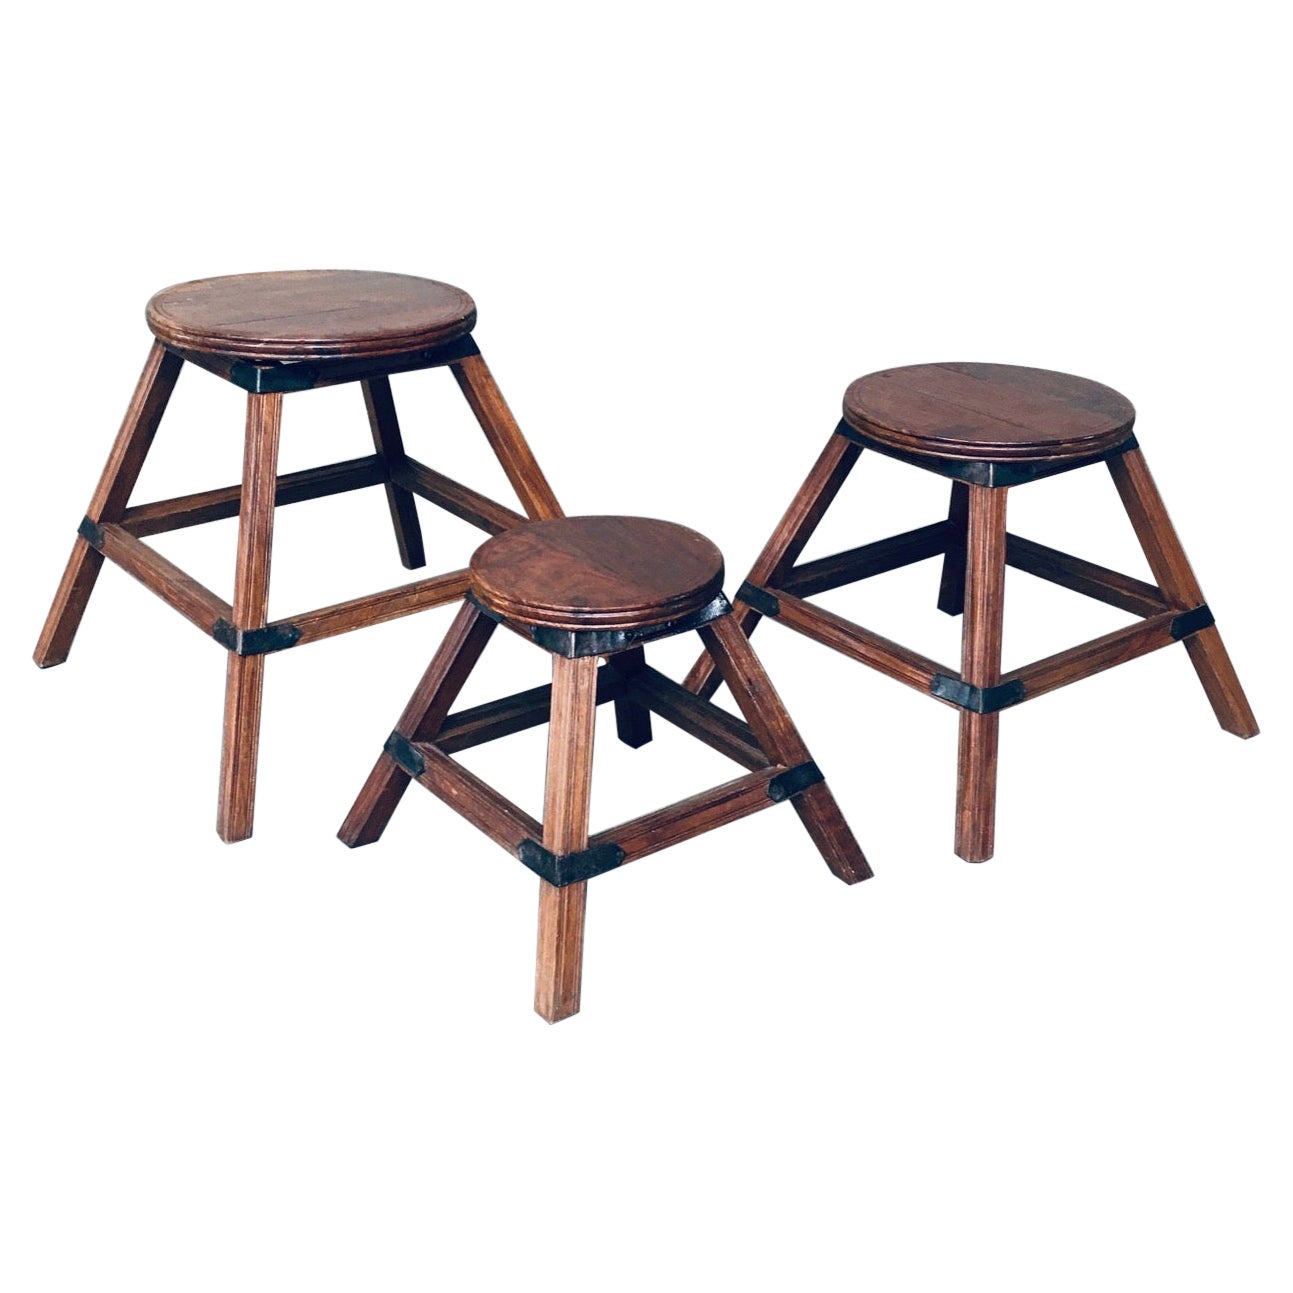 Handcrafted Wabi Sabi Style Nesting Table Set, France, 1950's For Sale